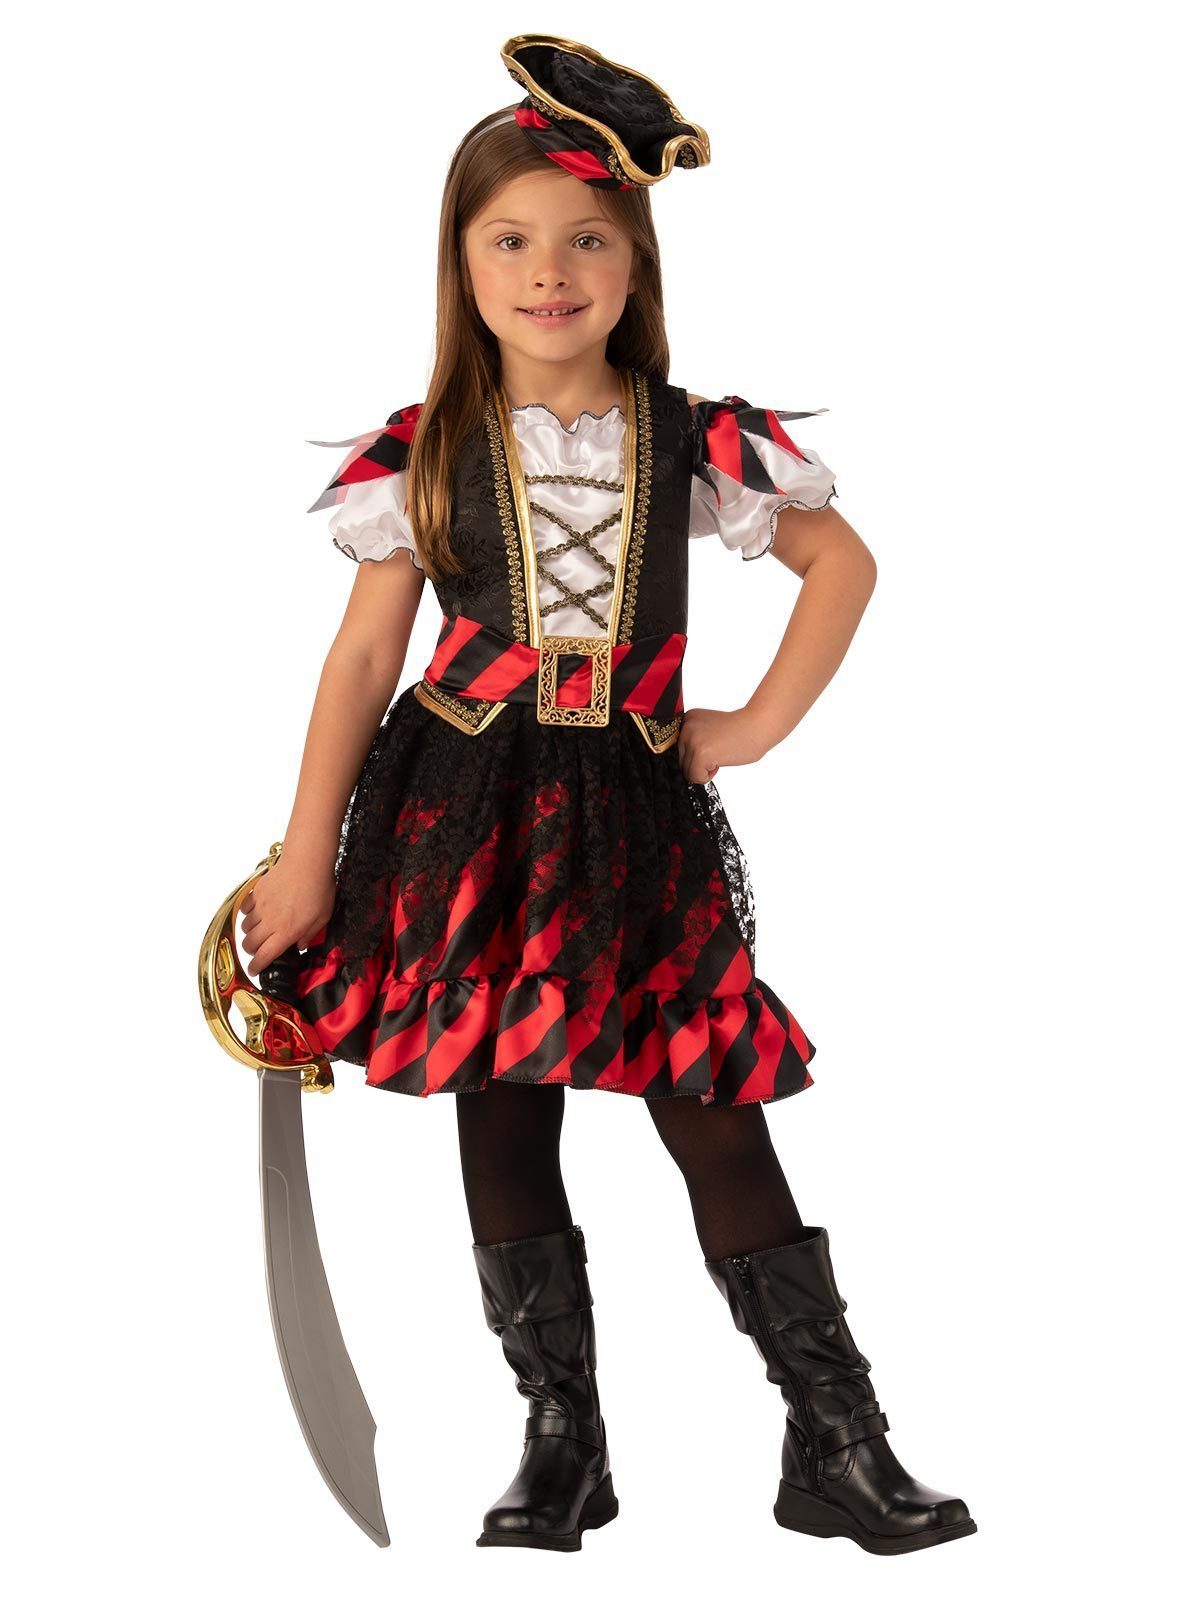 Shop Pirate Costumes for Adults & Kids